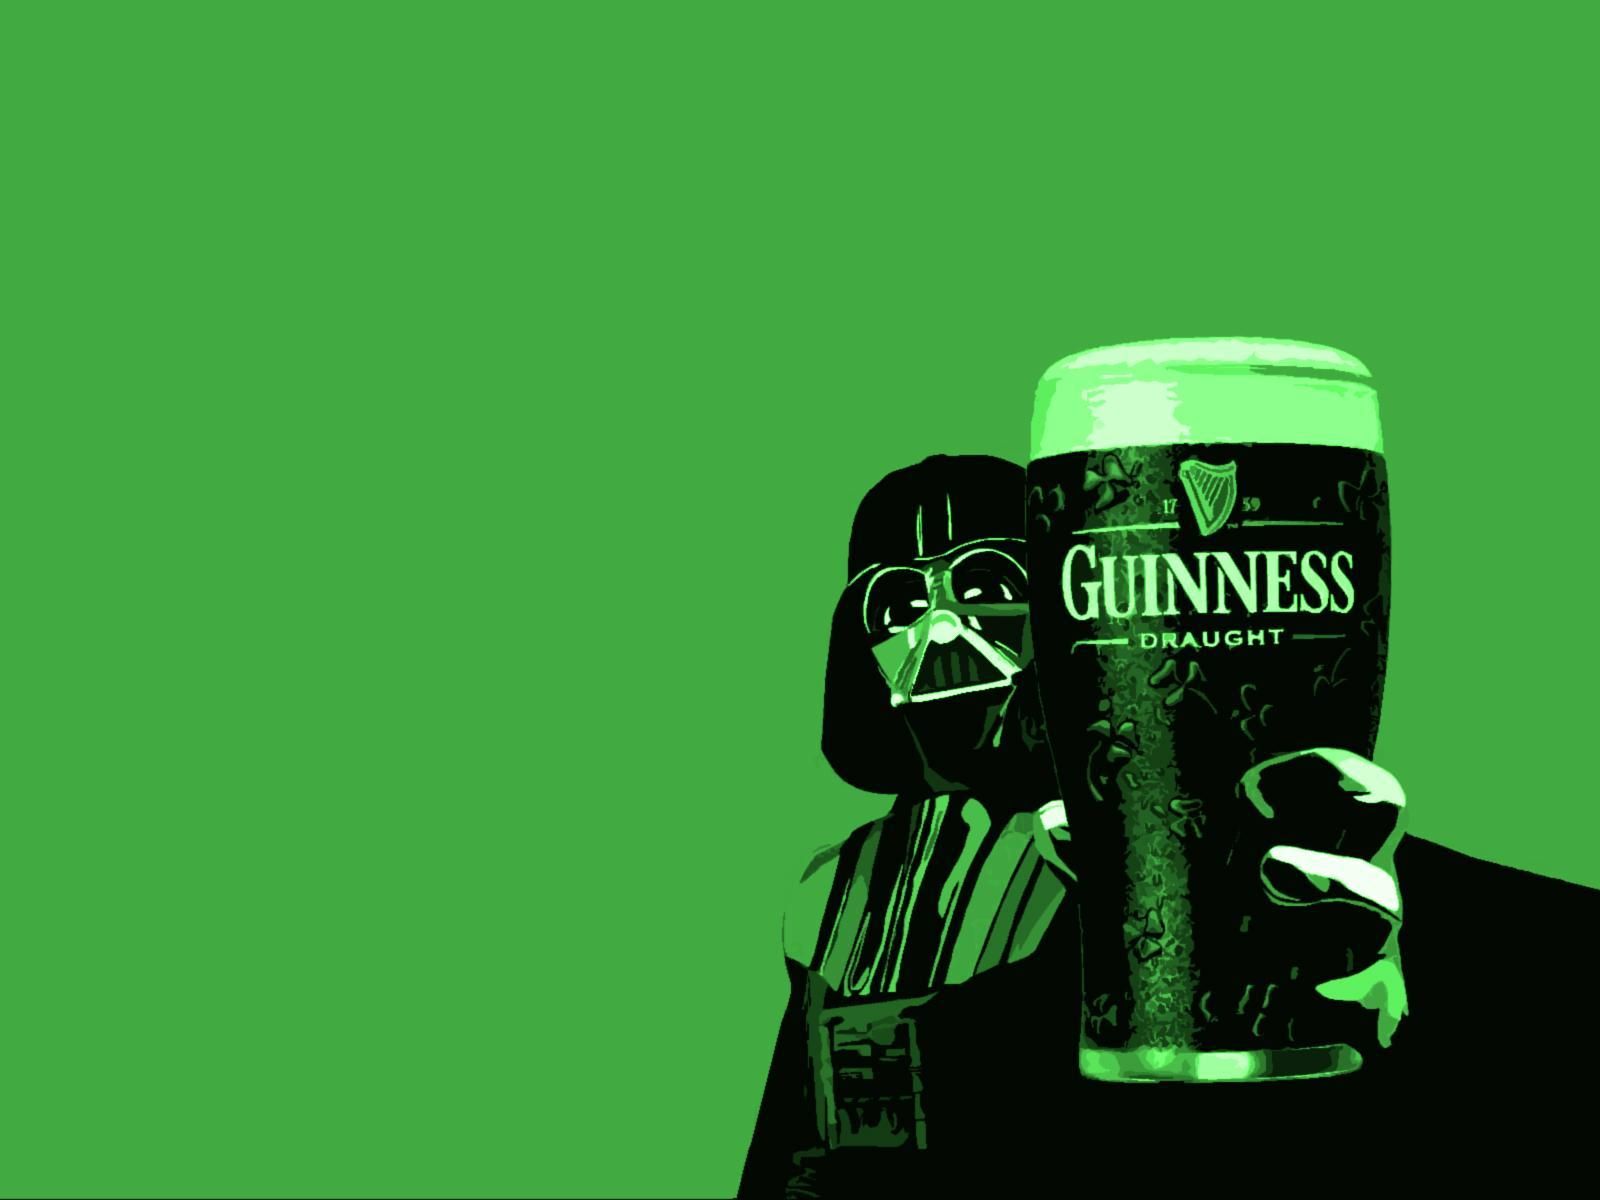 Wallpaper Wednesday – St. Patrick's Day Edition